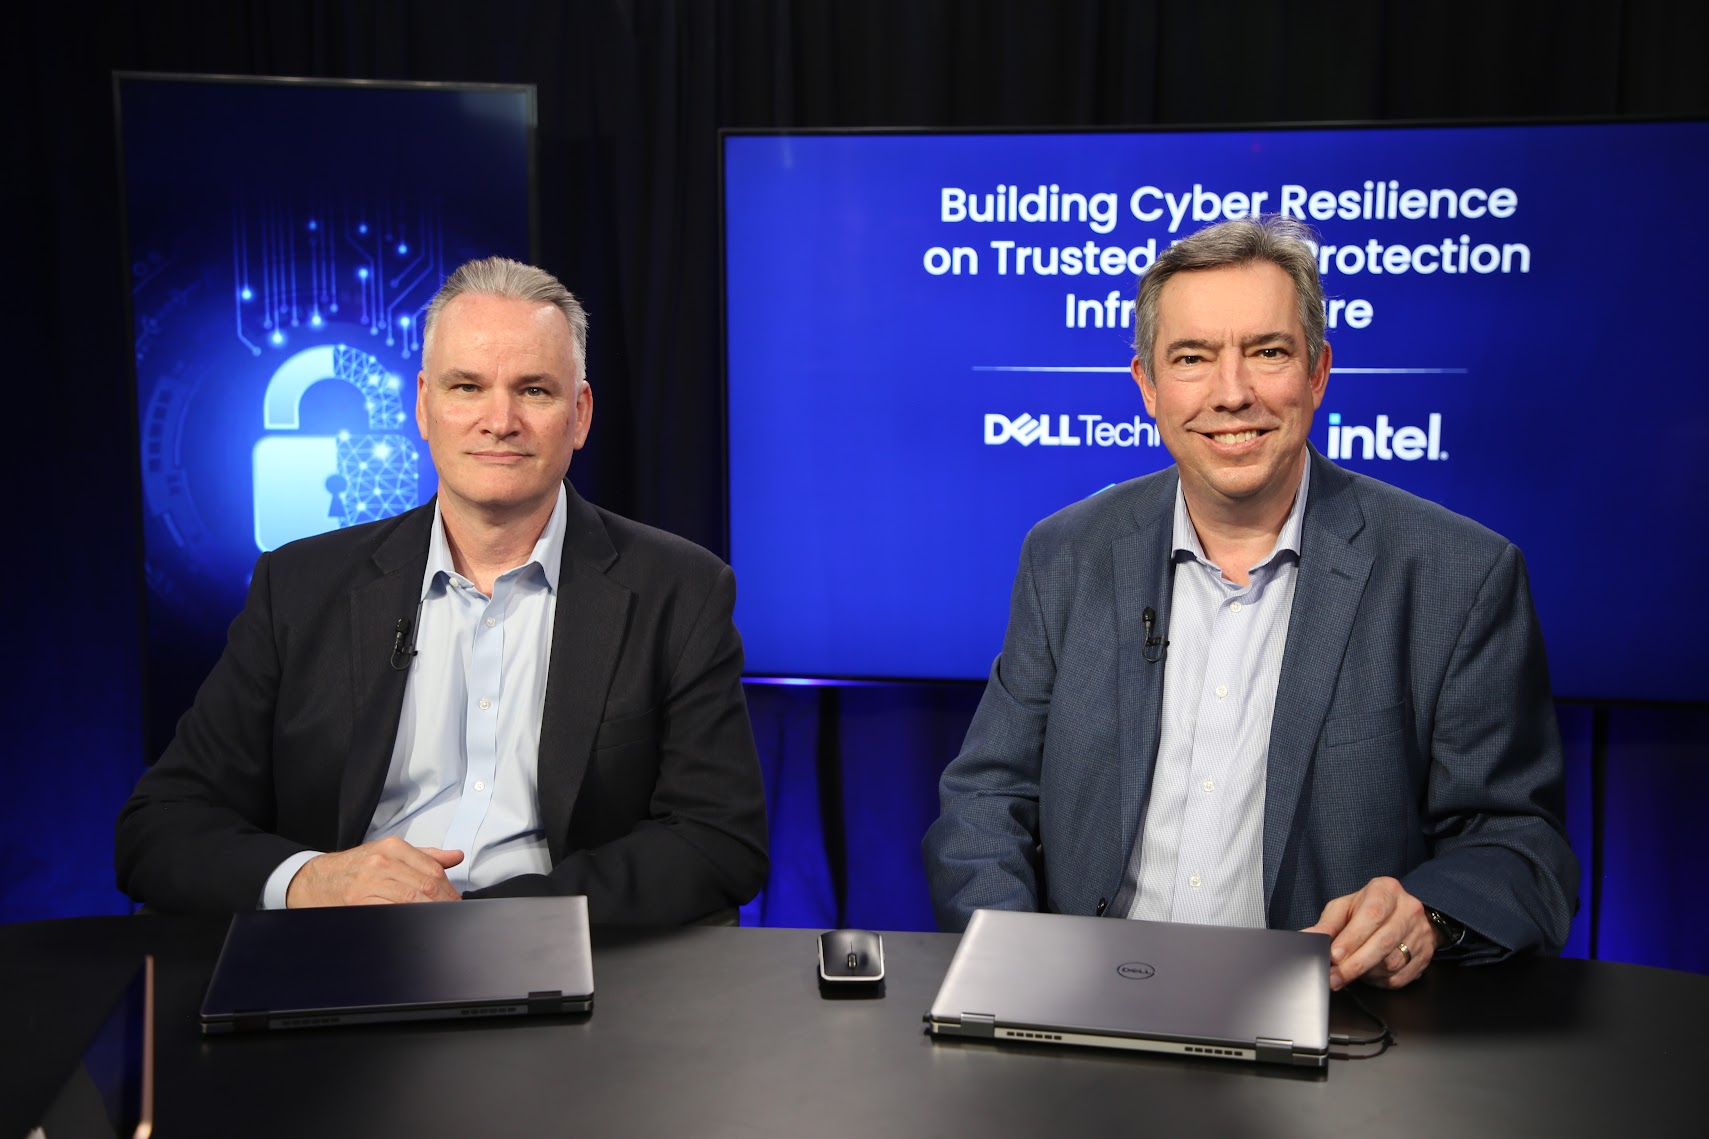 Rich Colbert, field chief technology officer of Dell Technologies, and Rob Emsley, director of data protection marketing at Dell Technologies, talk with theCUBE about Dell's latest data protection announcements. Dell Technologies